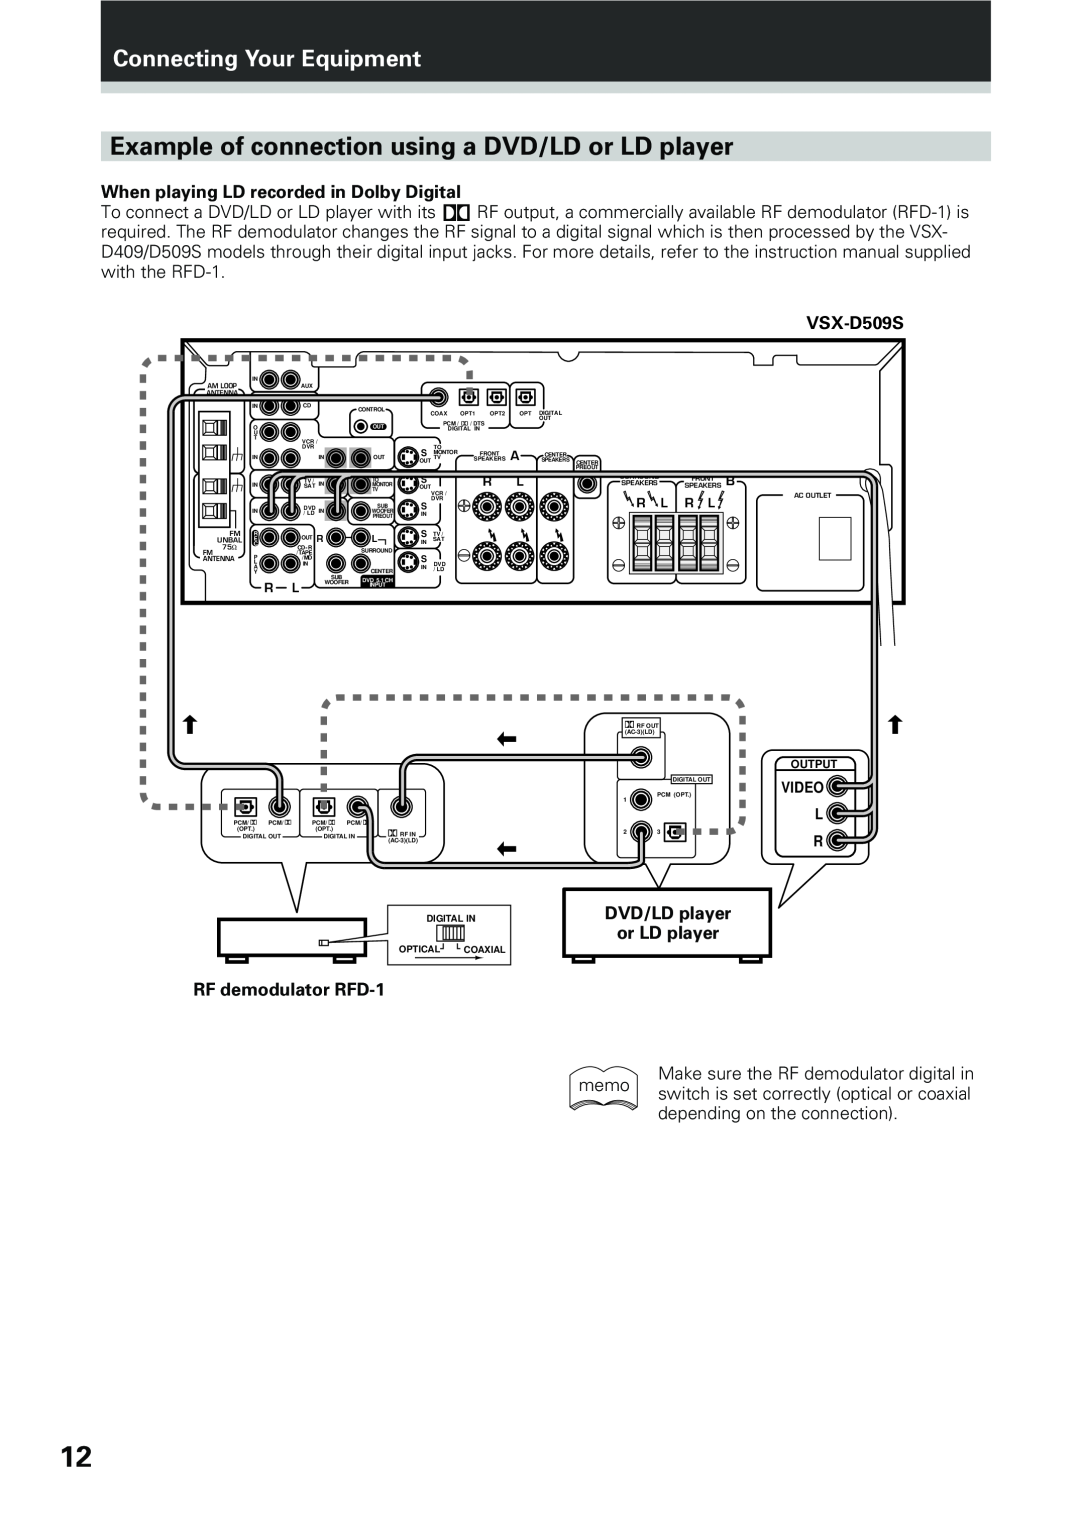 Pioneer VSX-D509S manual Example of connection using a DVD/LD or LD player, Connecting Your Equipment, RF demodulator RFD-1 